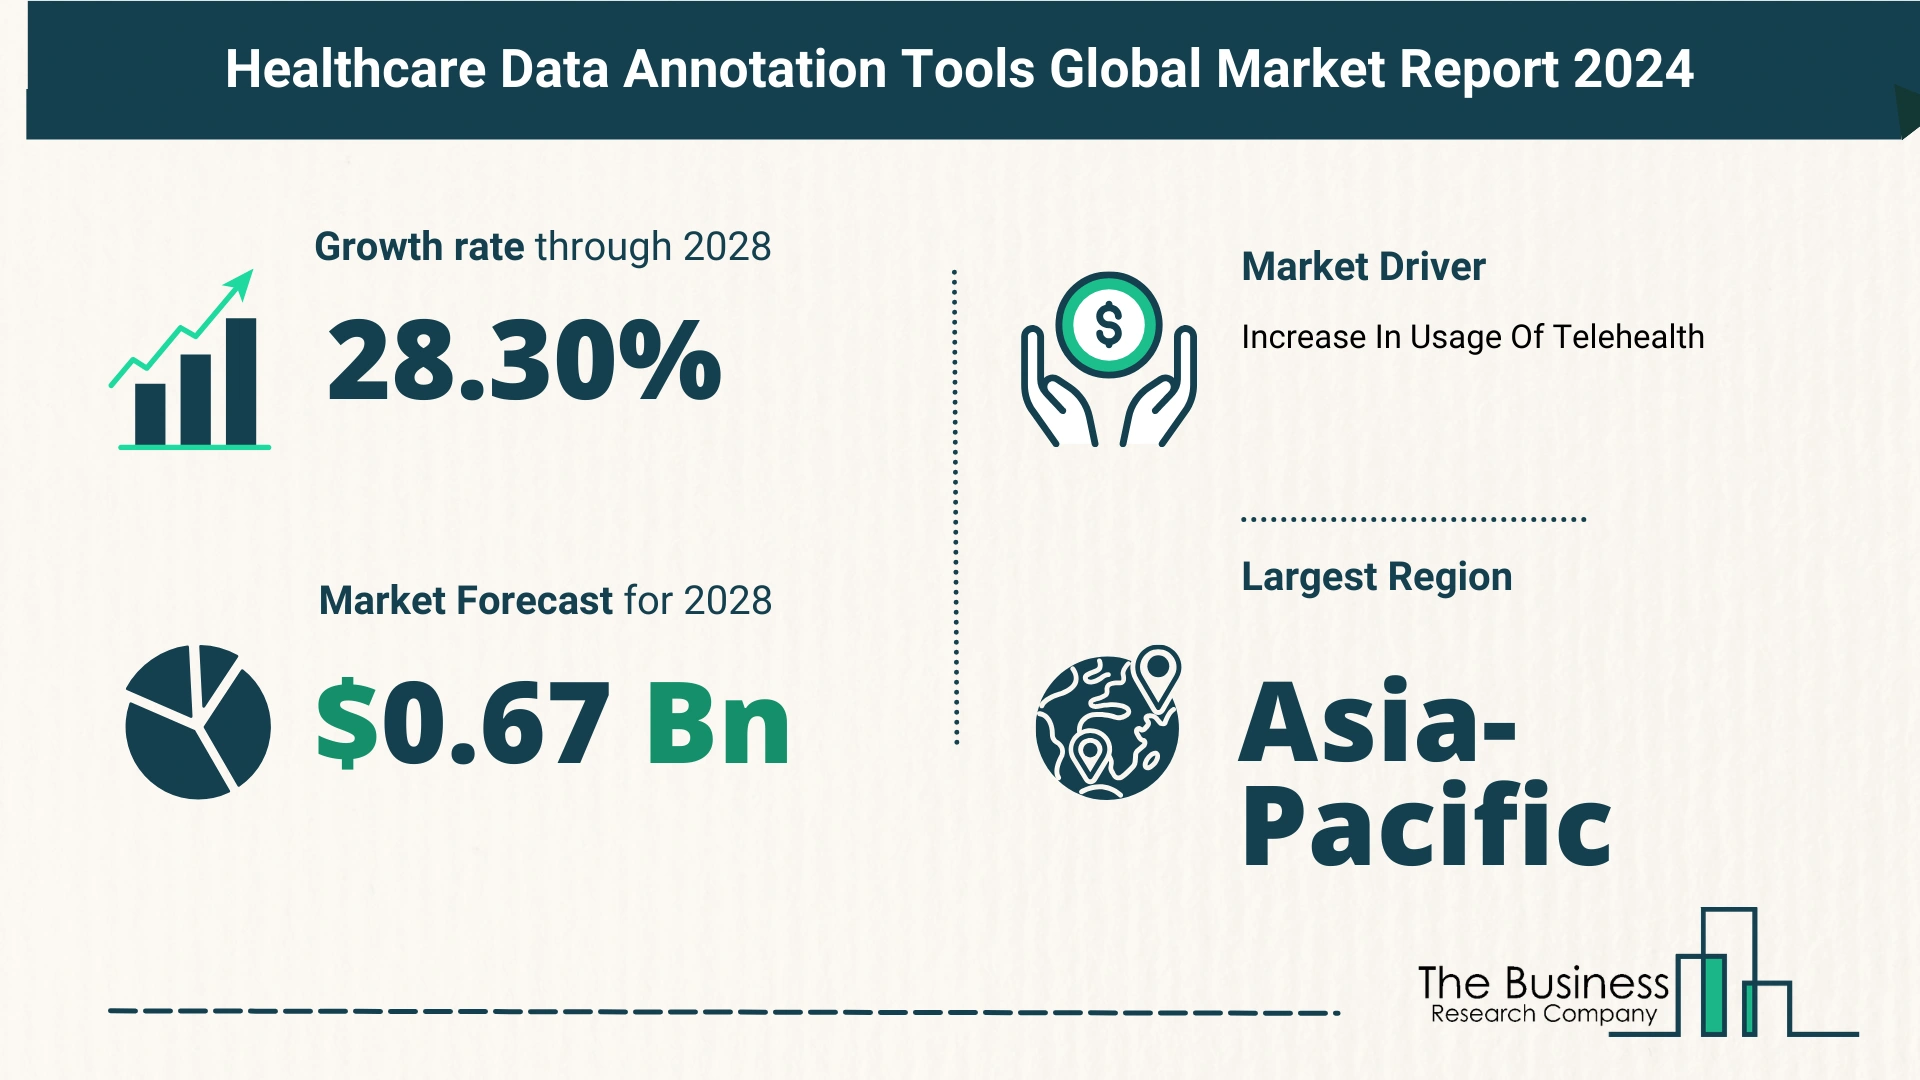 What Is The Forecast Growth Rate For The Healthcare Data Annotation Tools Market?